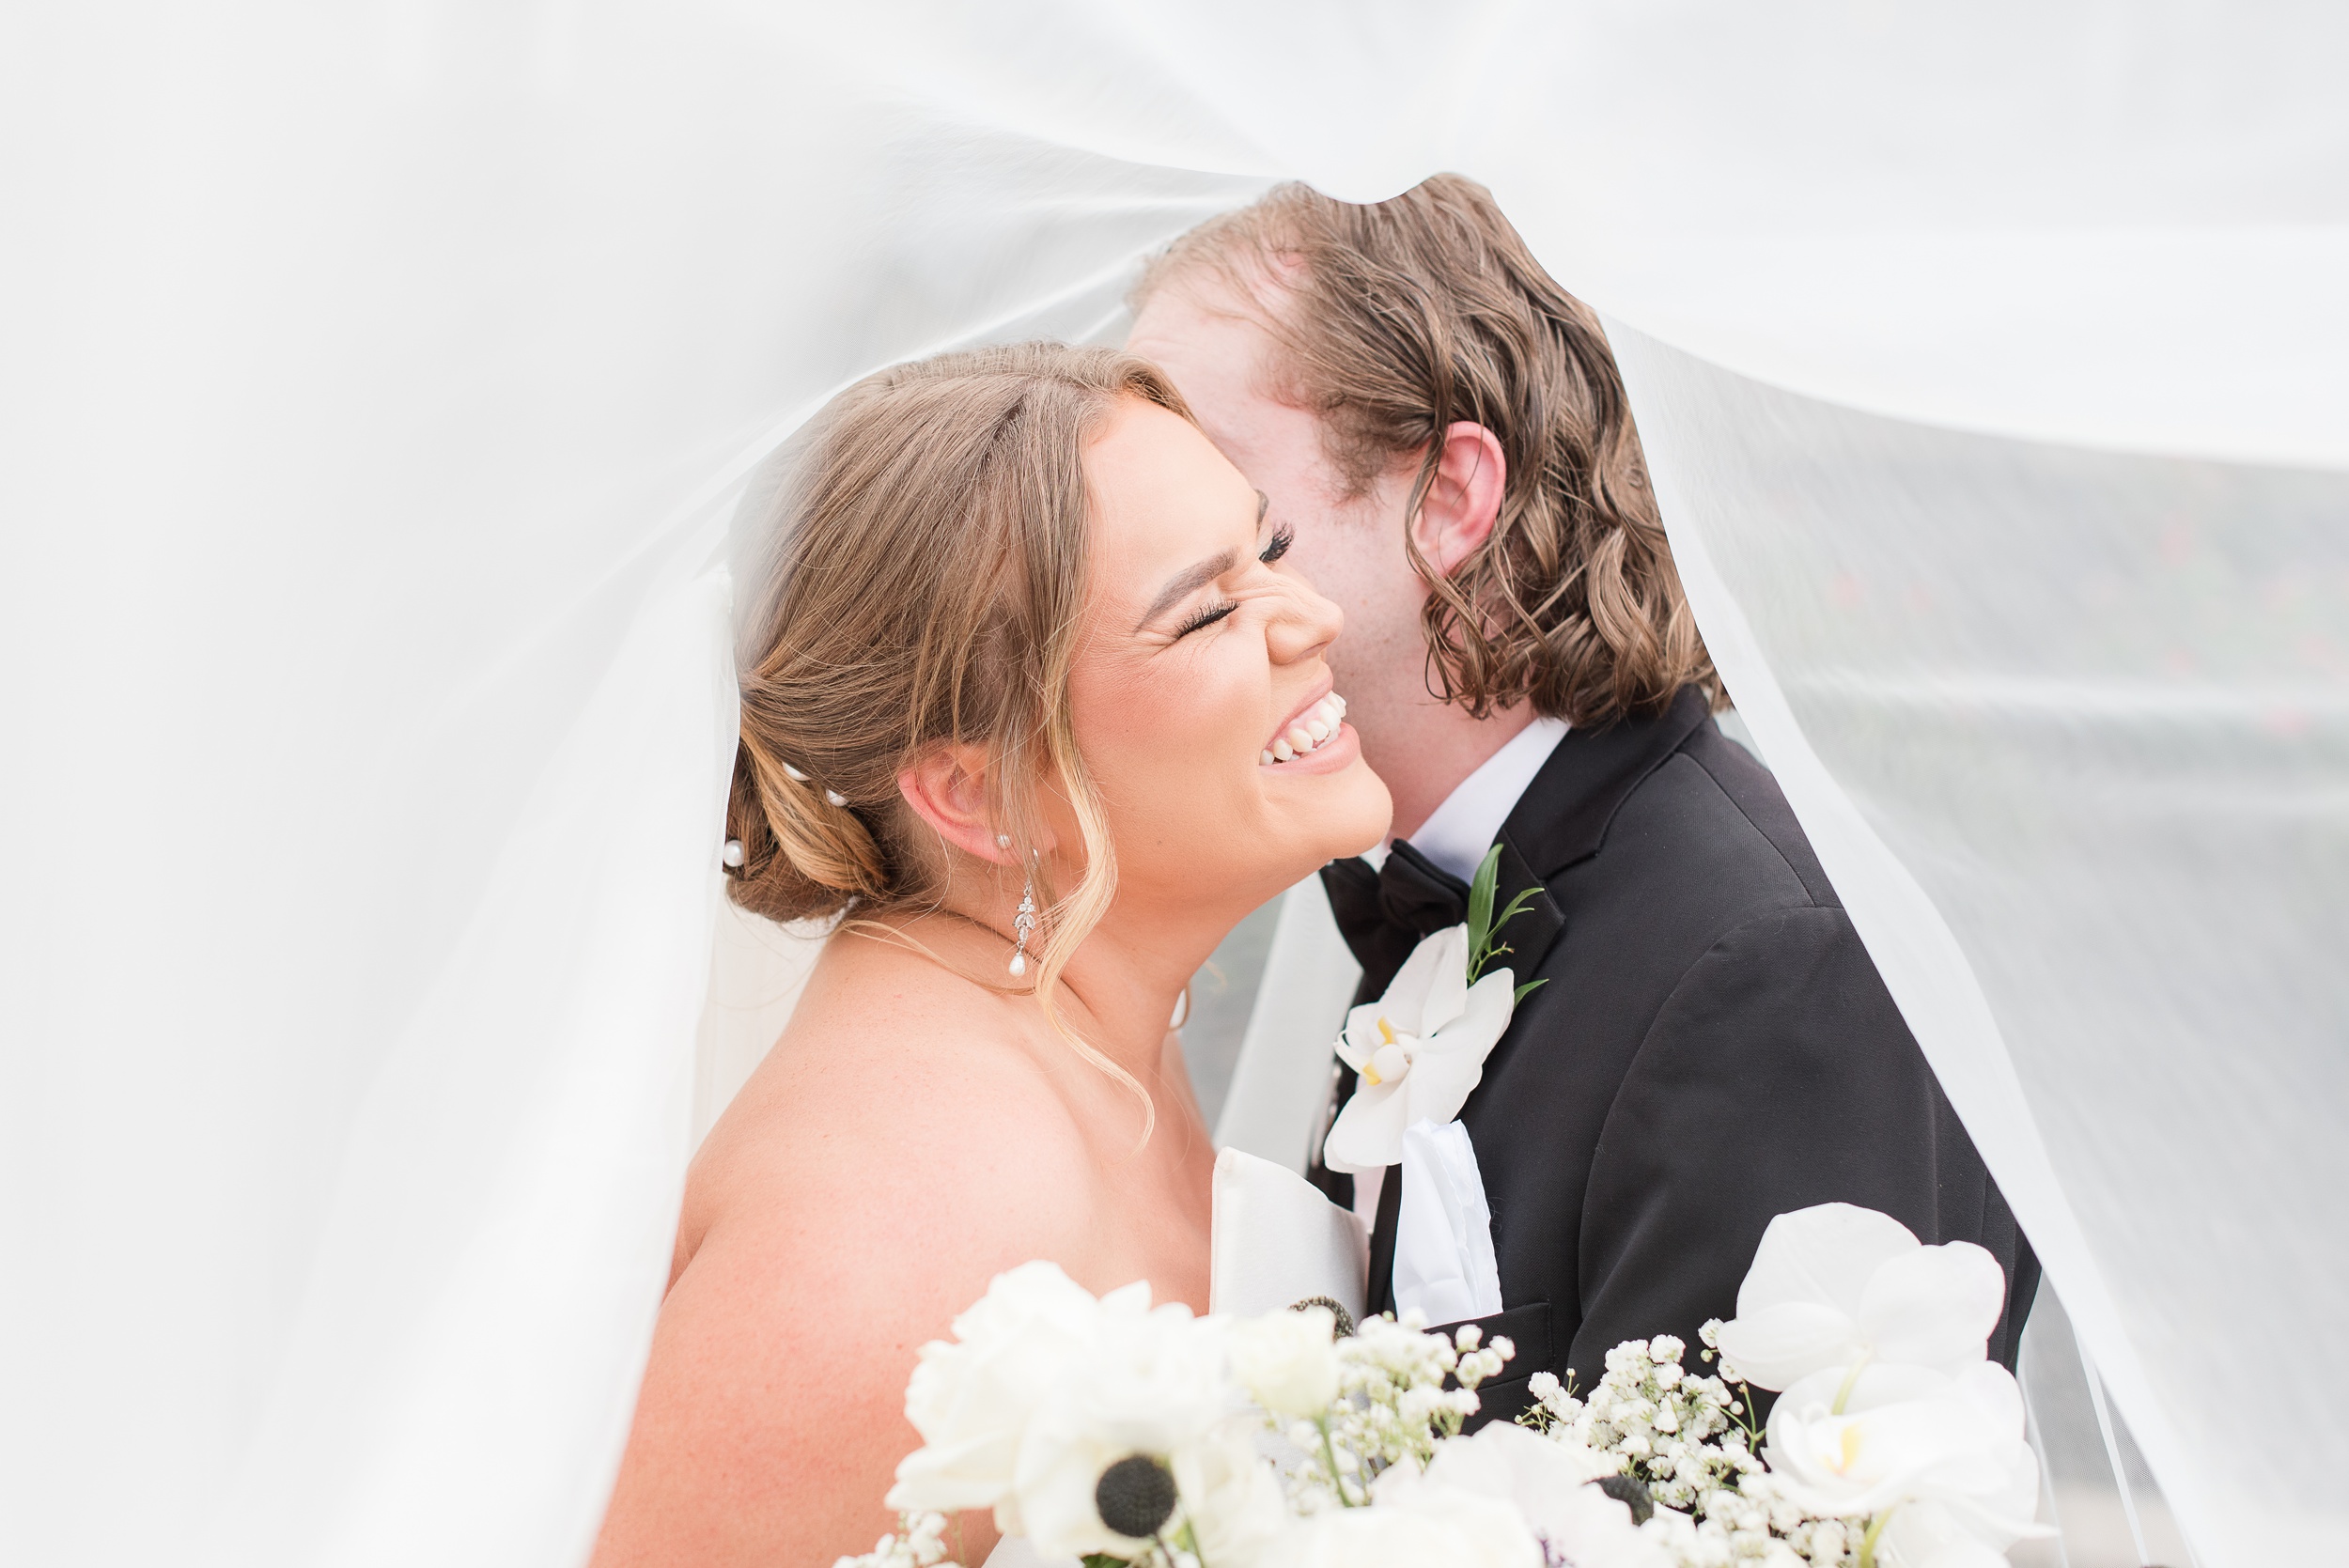 A bride giggles while her groom whispers in her ear under a veil